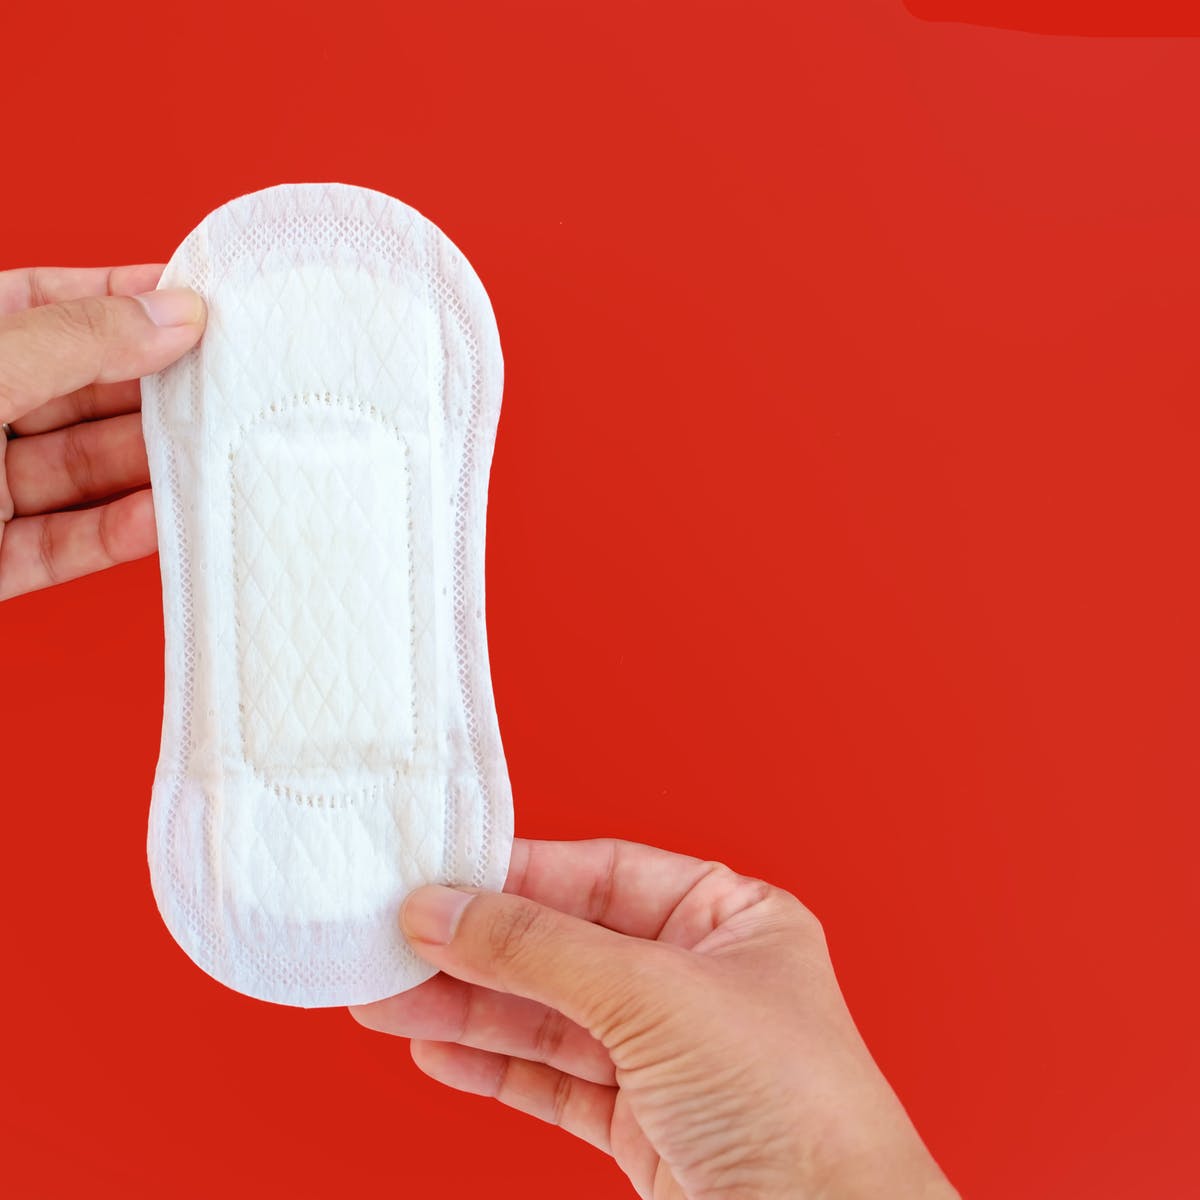 Are menstrual pads a luxury item?